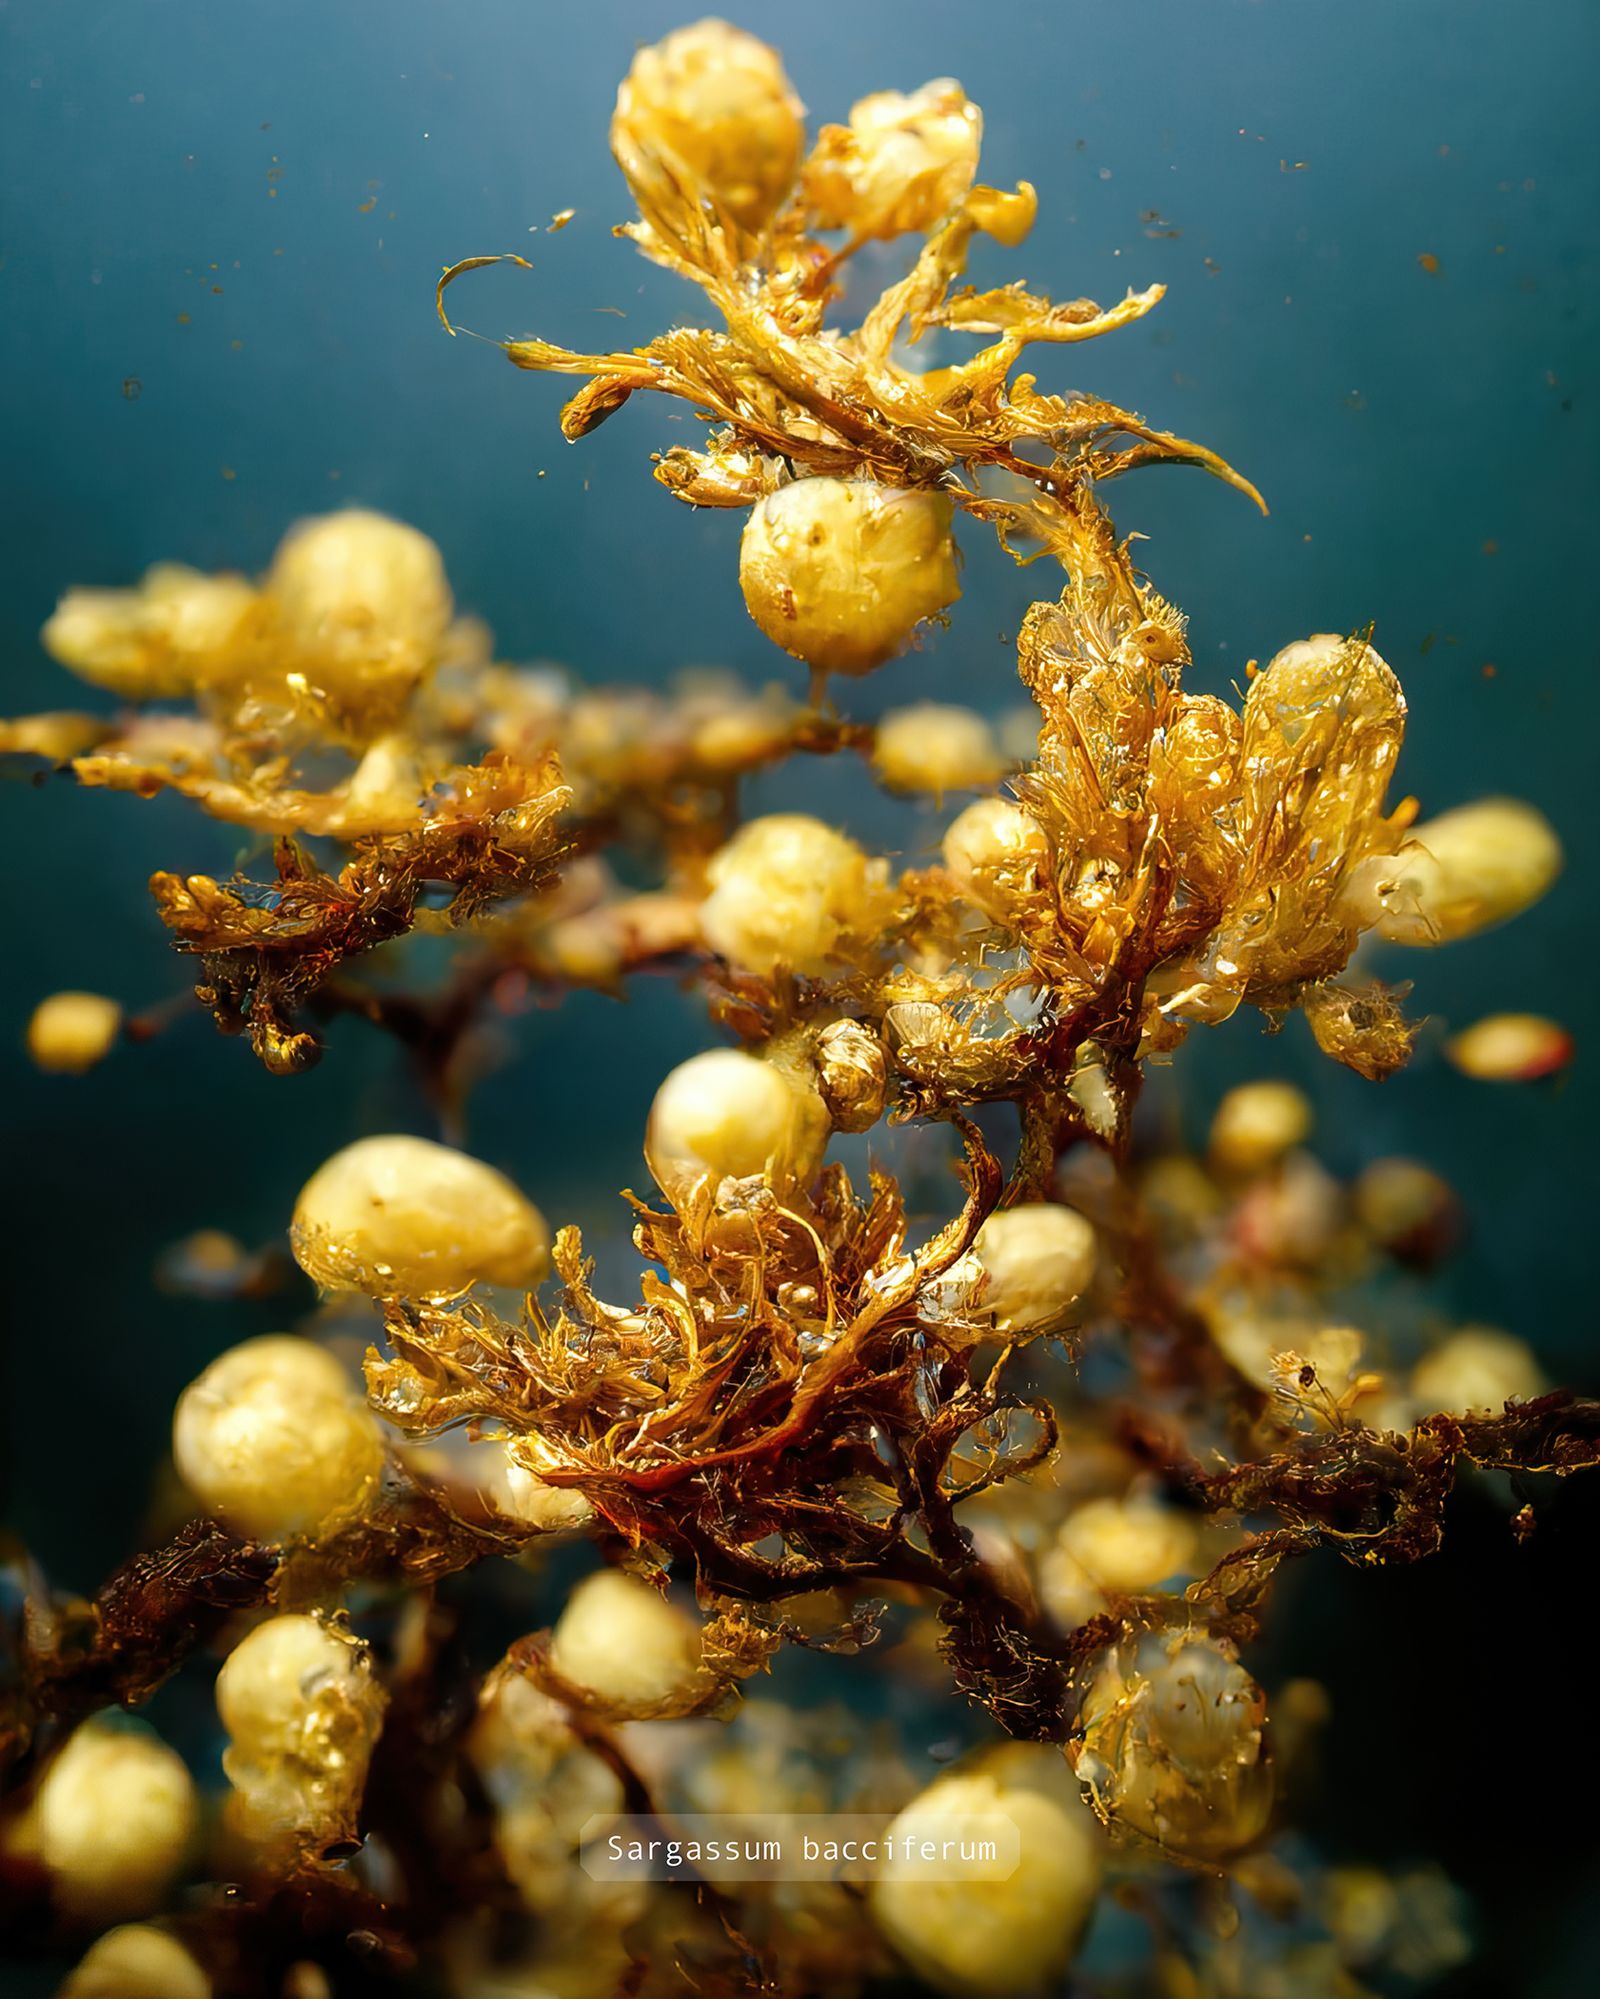 © Craig Ames - Image from the Photographs of British Algae - AI Impressions photography project